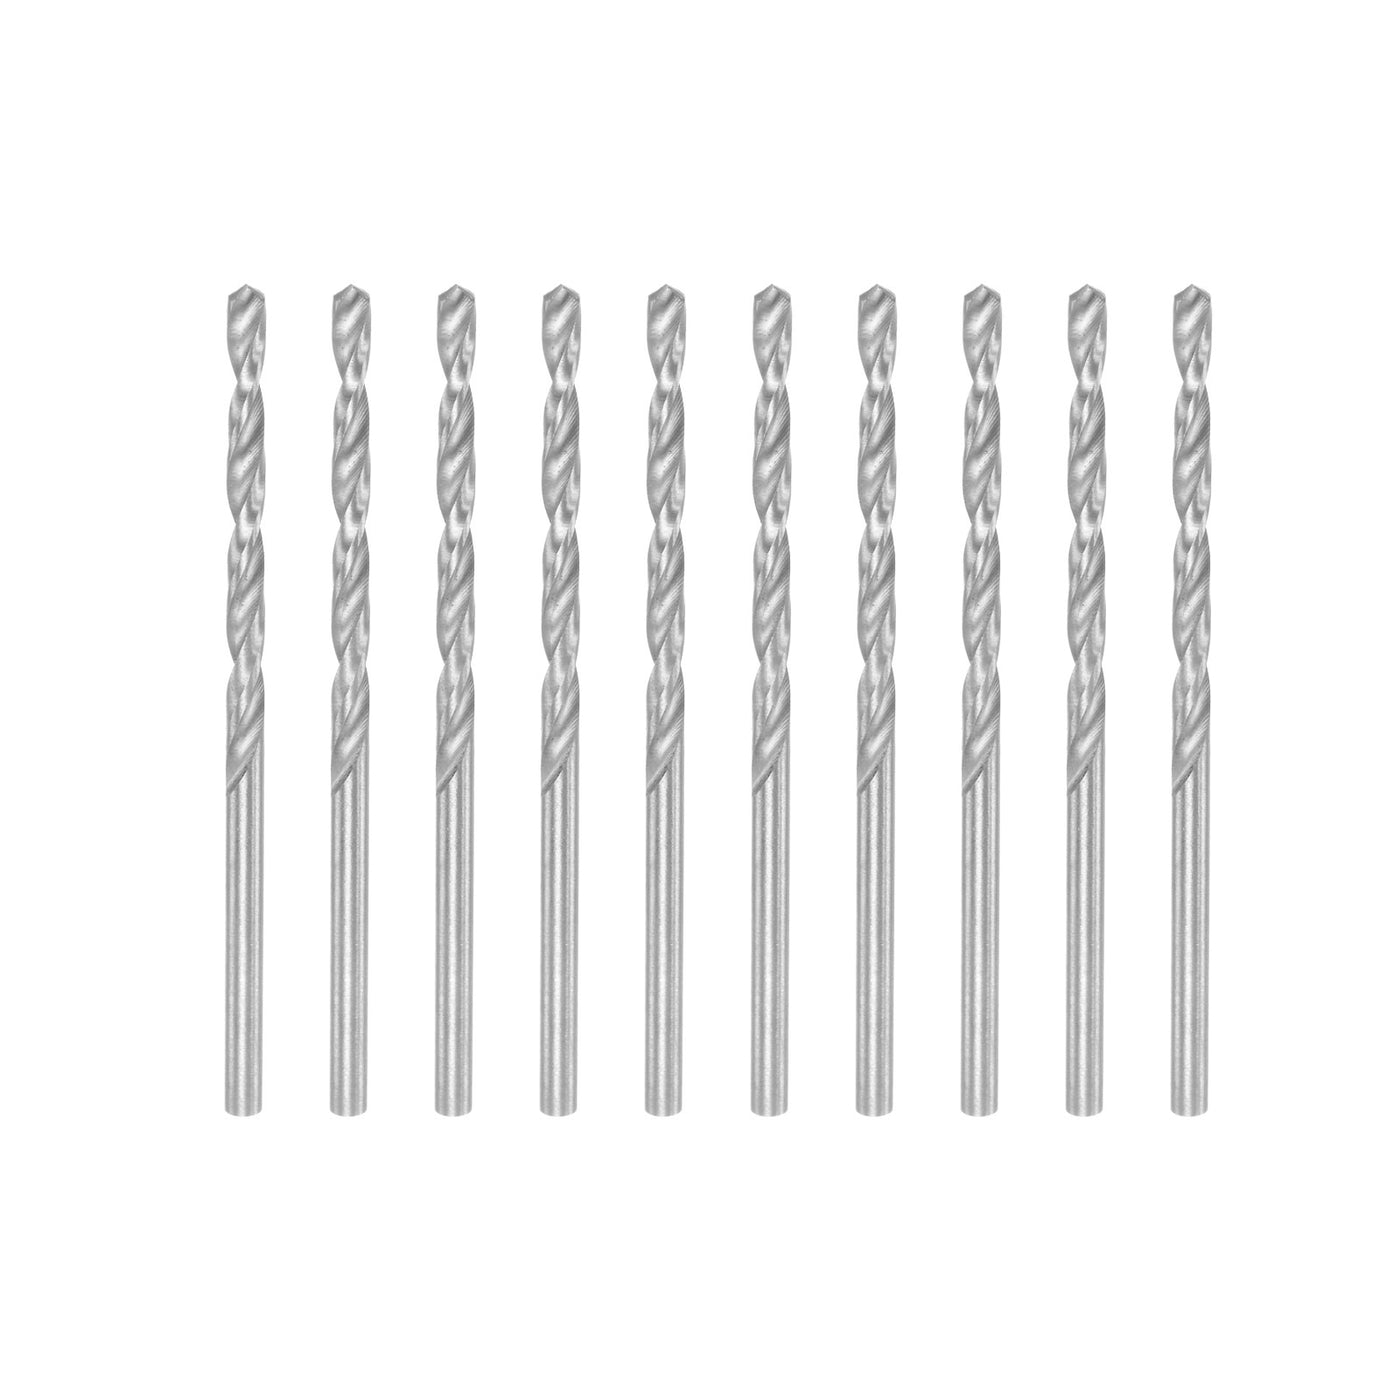 uxcell Uxcell 10 Pcs 2.65mm High Speed Steel Drill Bits, Fully Ground 60mm Length Drill Bit